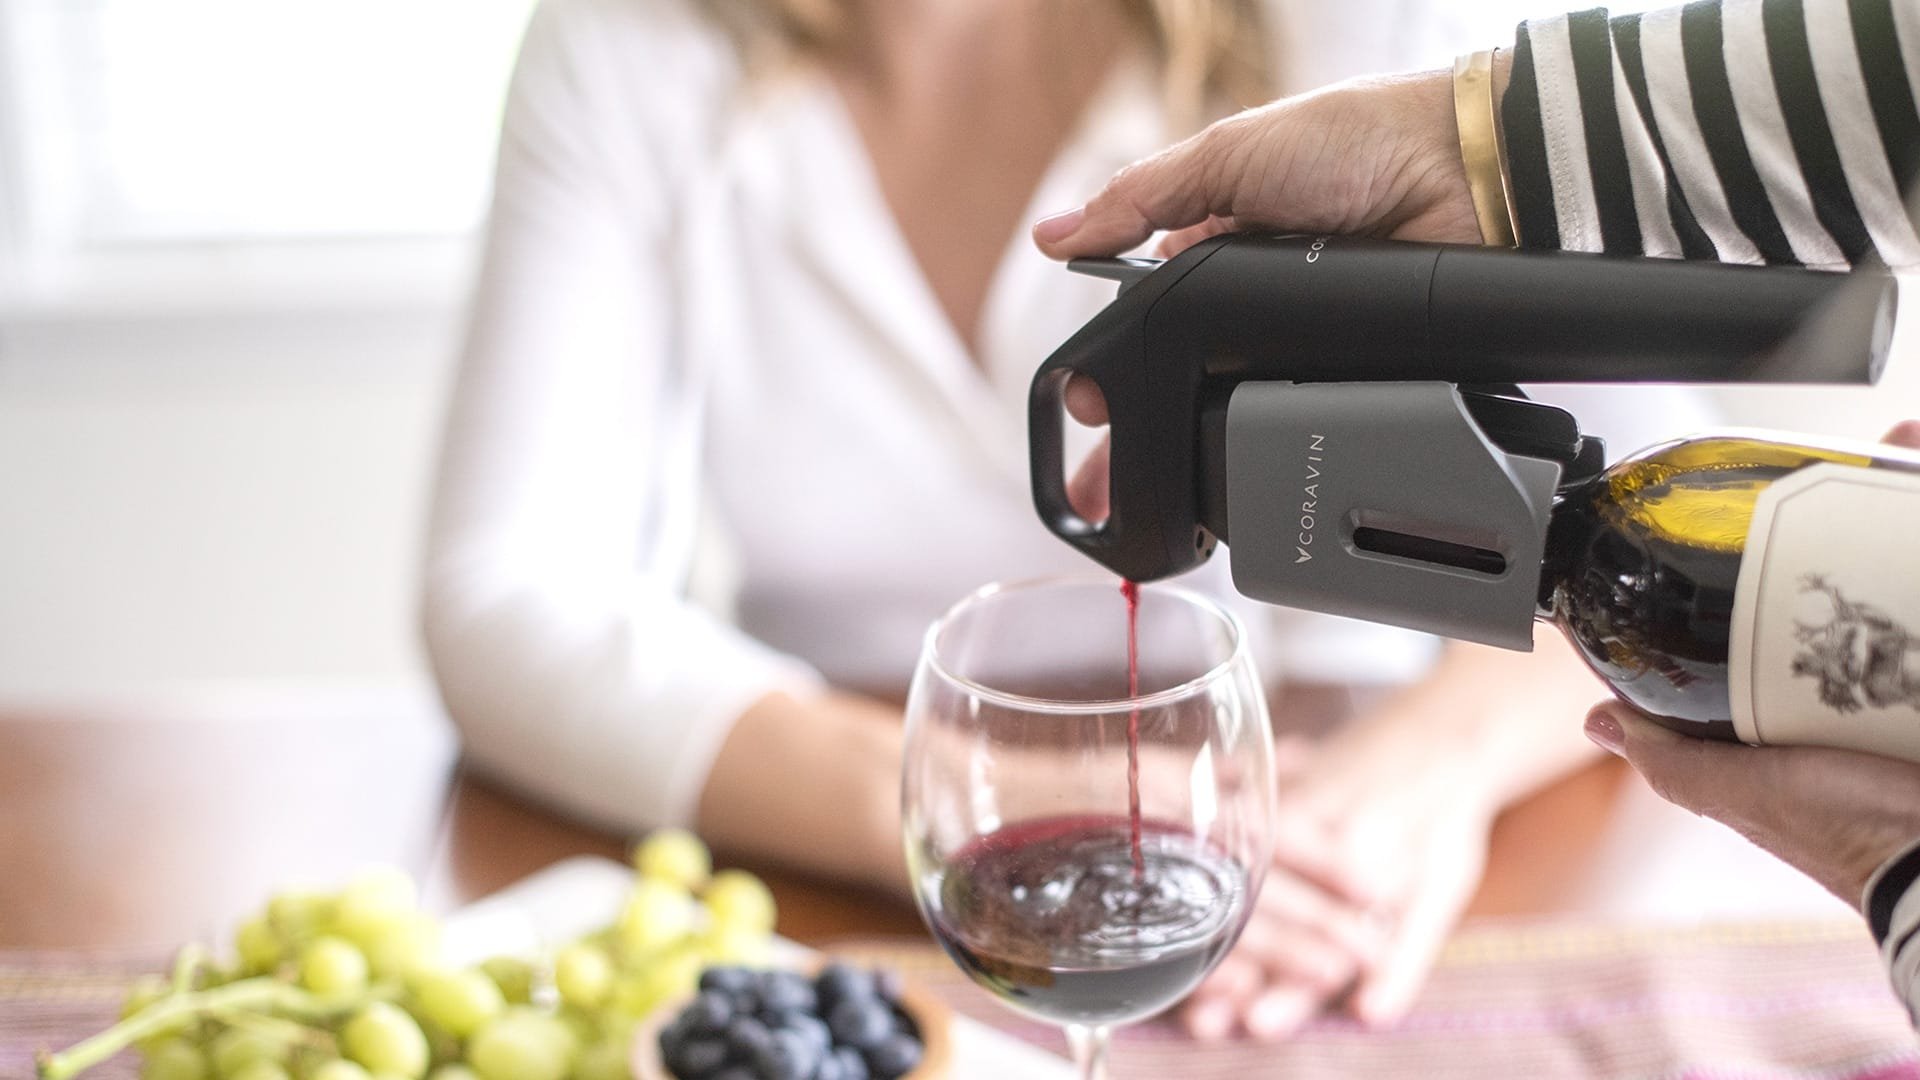 Coravin Model Three wine preservation system protects your wine for years